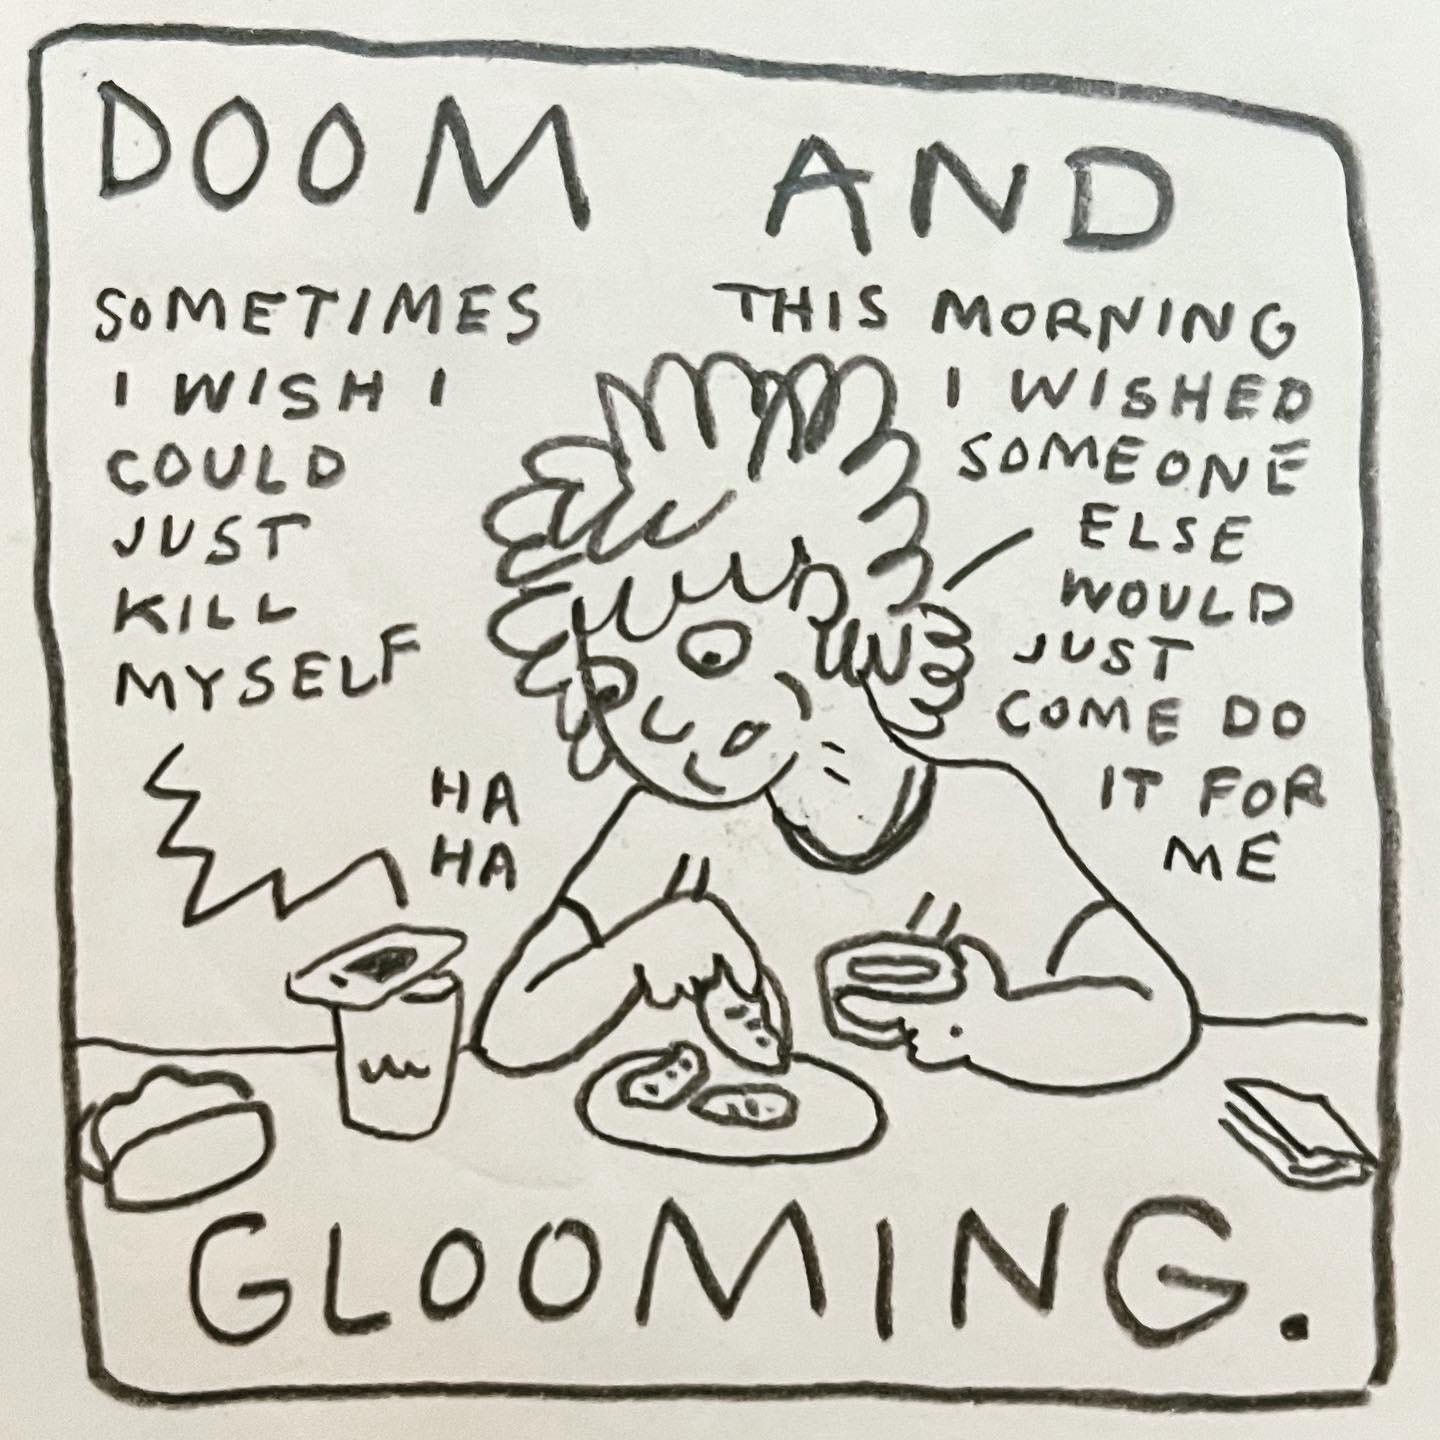 Panel 4: doom and glooming. Image: Lark sits at a table eating cookies and milk. Their phone is balanced on a glass of water. Someone on the phone says, "sometimes I wish I could just kill myself. Ha ha" Lark, mid-chew, replies "this morning I wished someone else would just come do it for me"